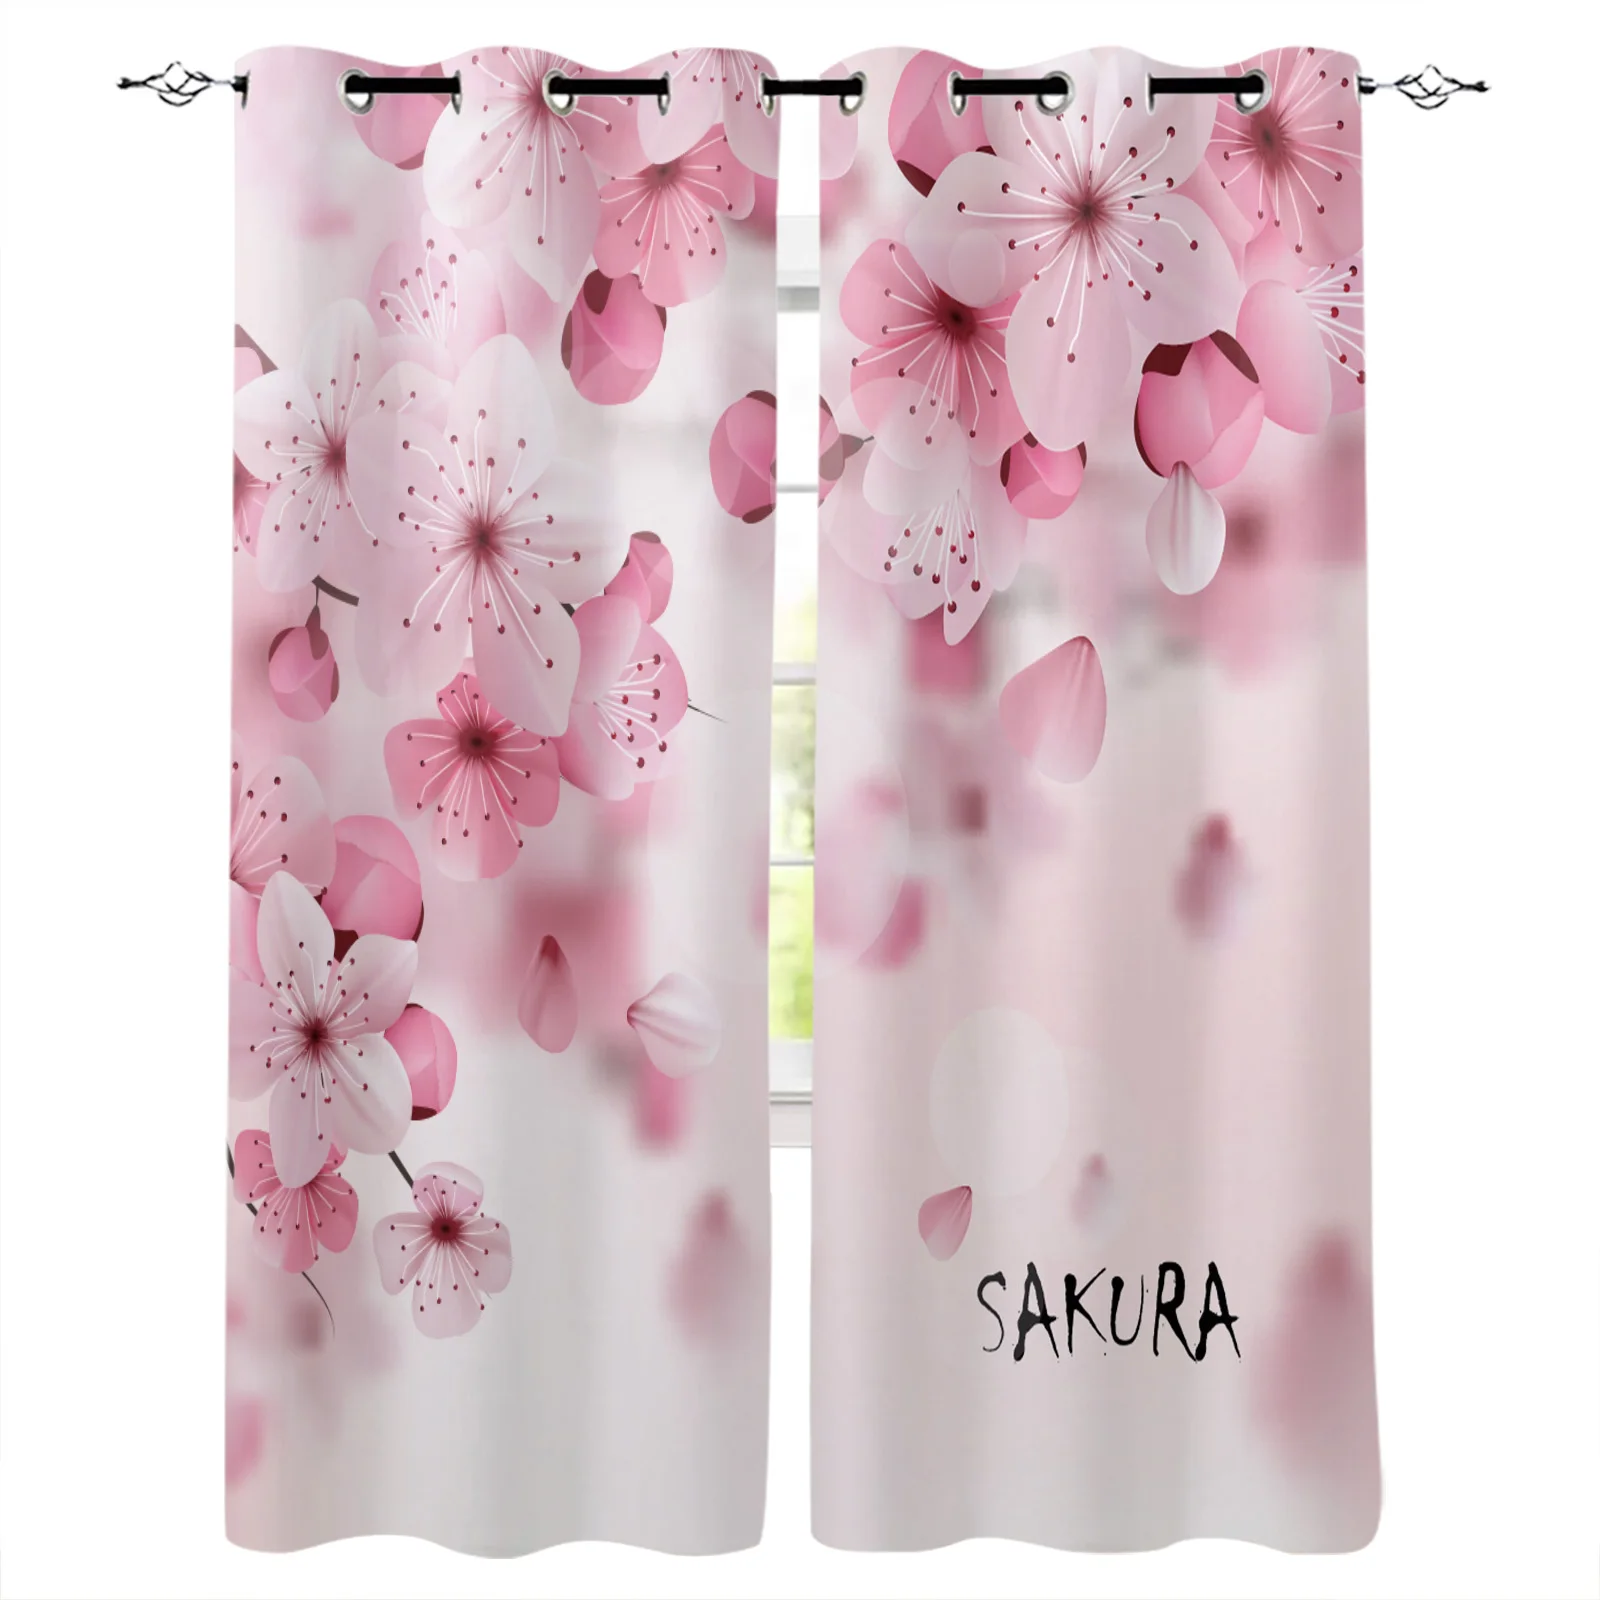 135 Cherry Blossom Flower Pink Roller Blind blackout FREE P&P various sizes 